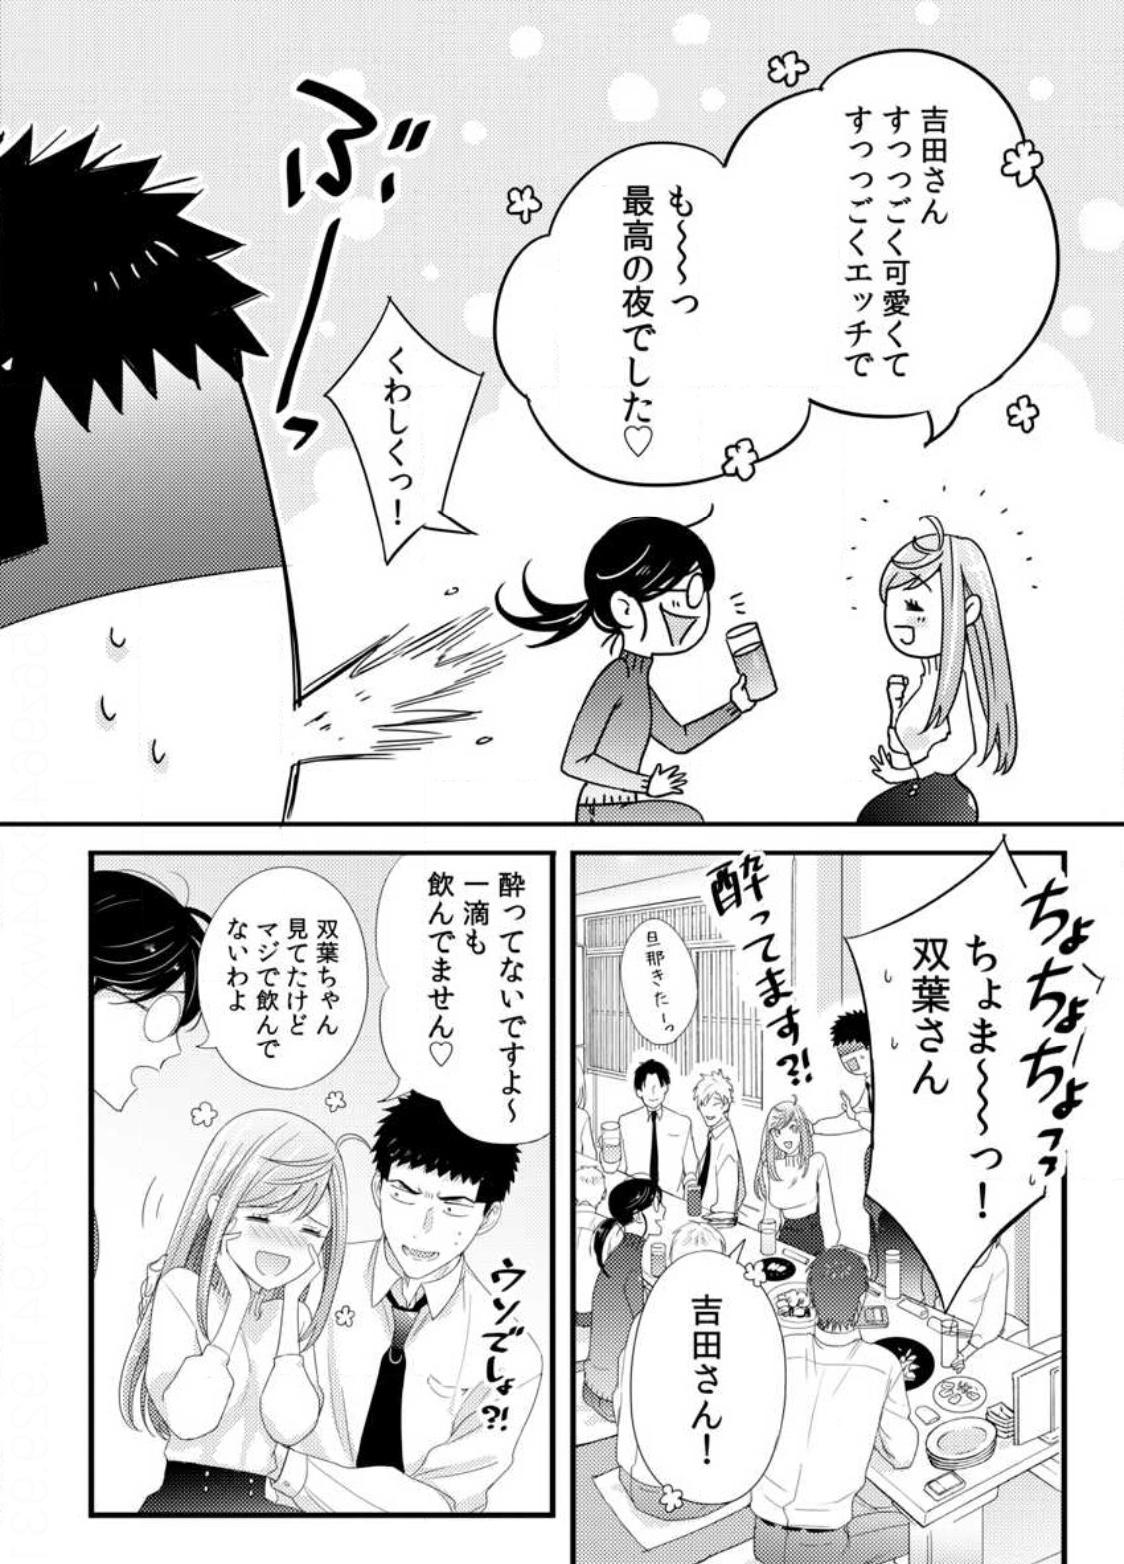 Please Let Me Hold You Futaba-San! Ch. 1-4 82